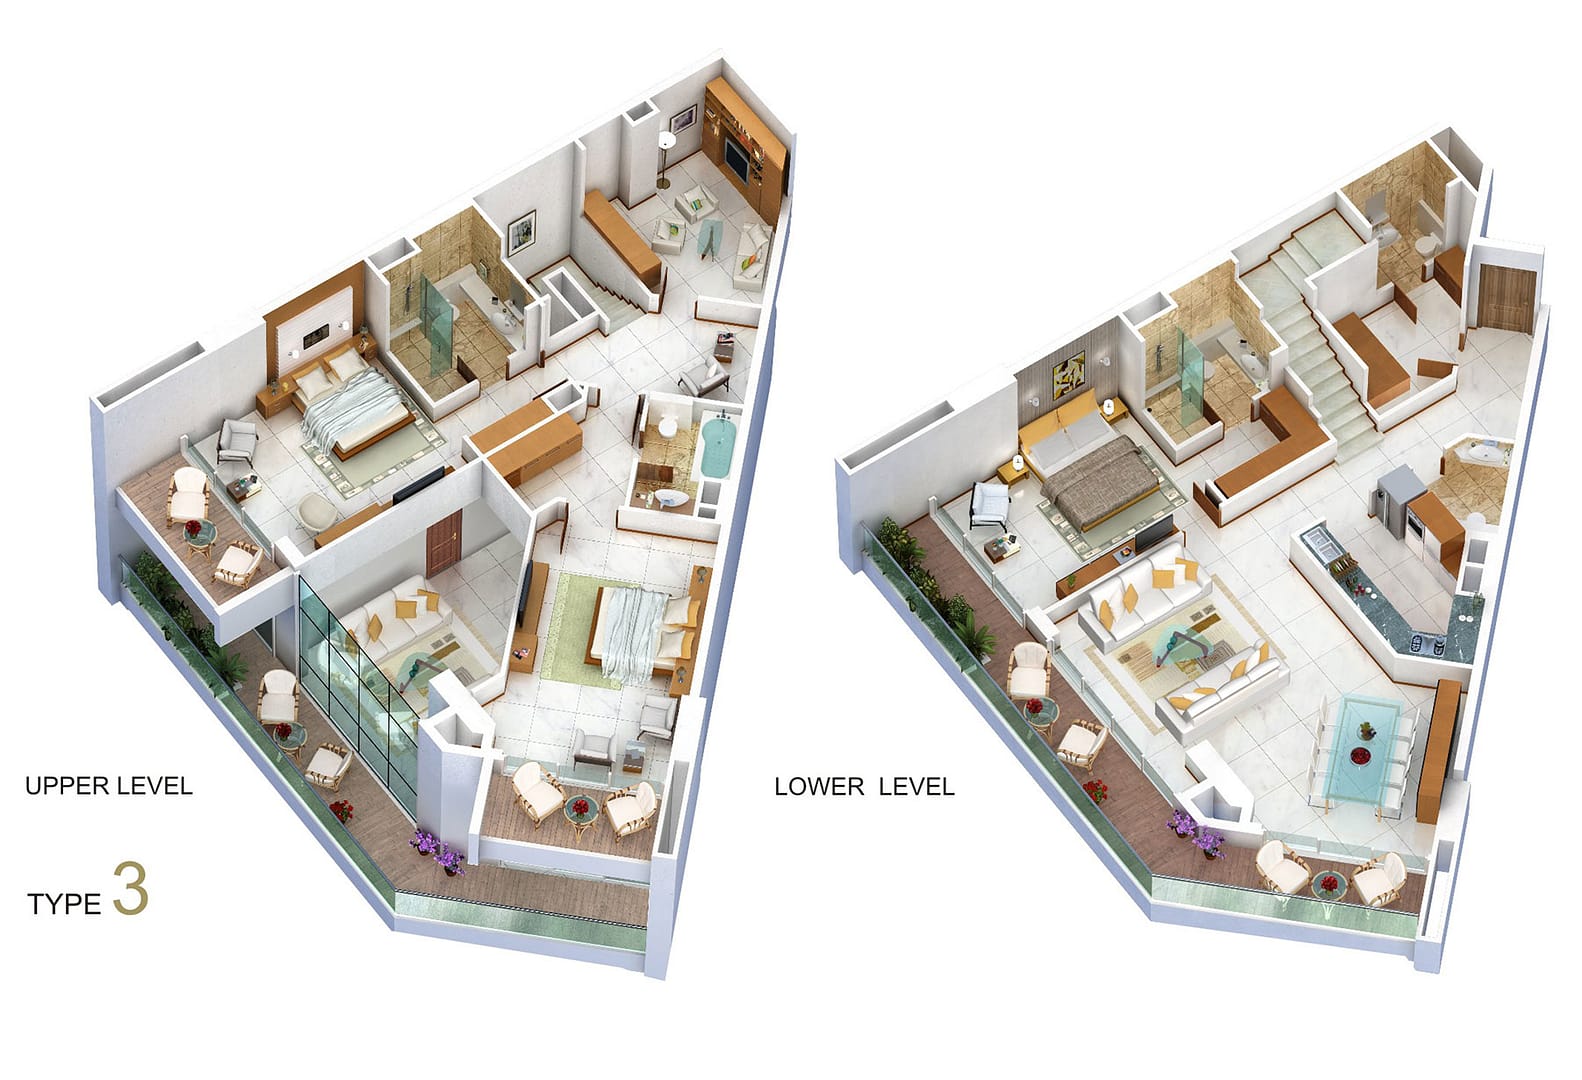 2D Plan, Flats for Sale, Flats for Rent, 2 Bedroom Apartment for Sale, 1 Bedroom Apartment for Sale